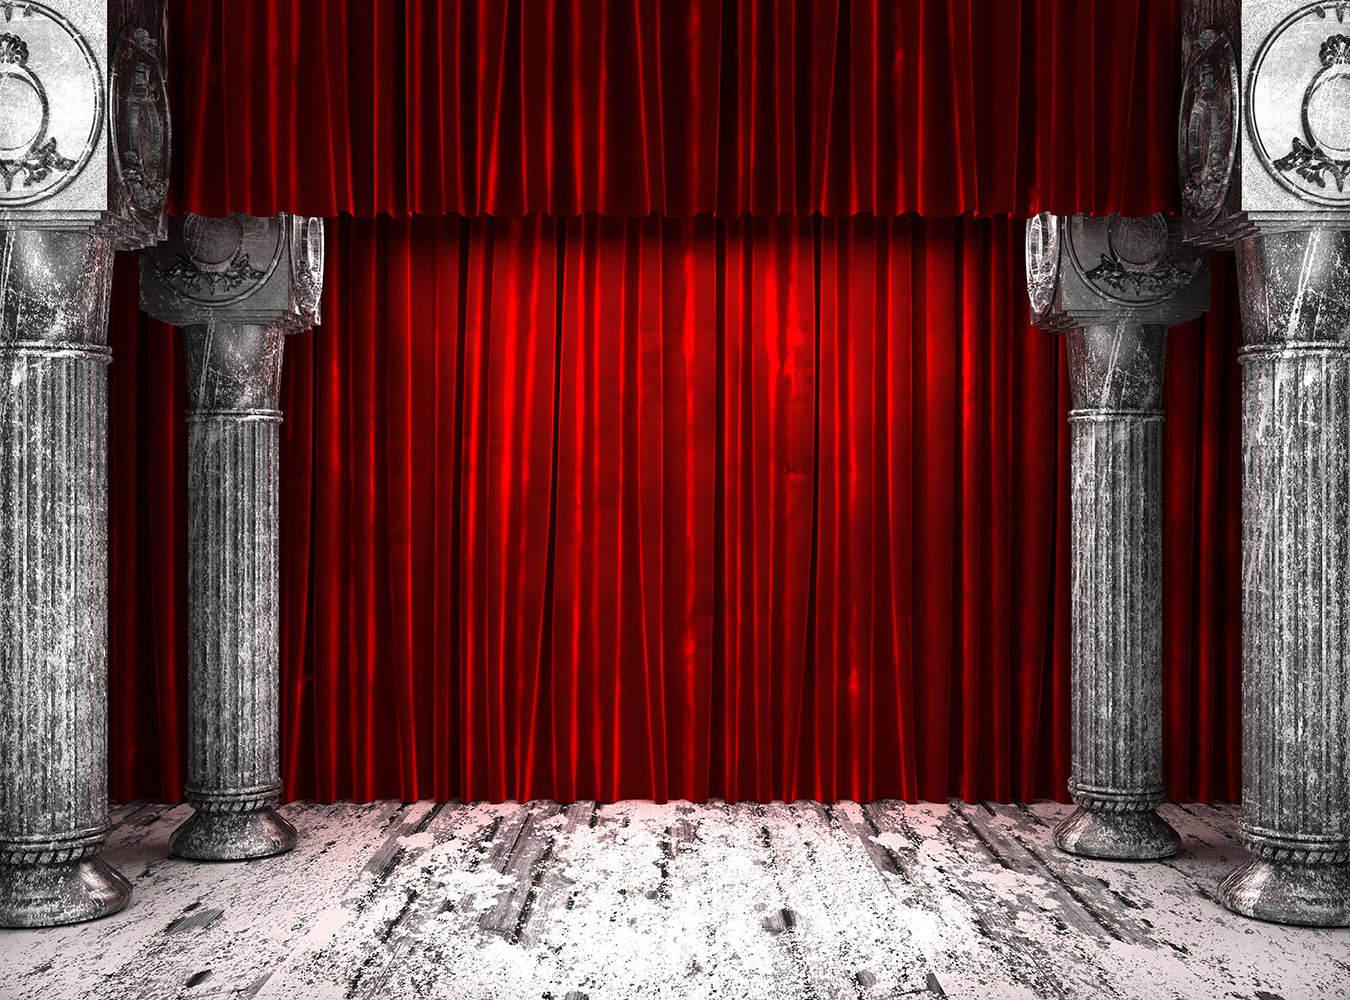 Red Fabric Curtain Background Photography Backdrop on Vintage Stage IB –  iBACKDROP